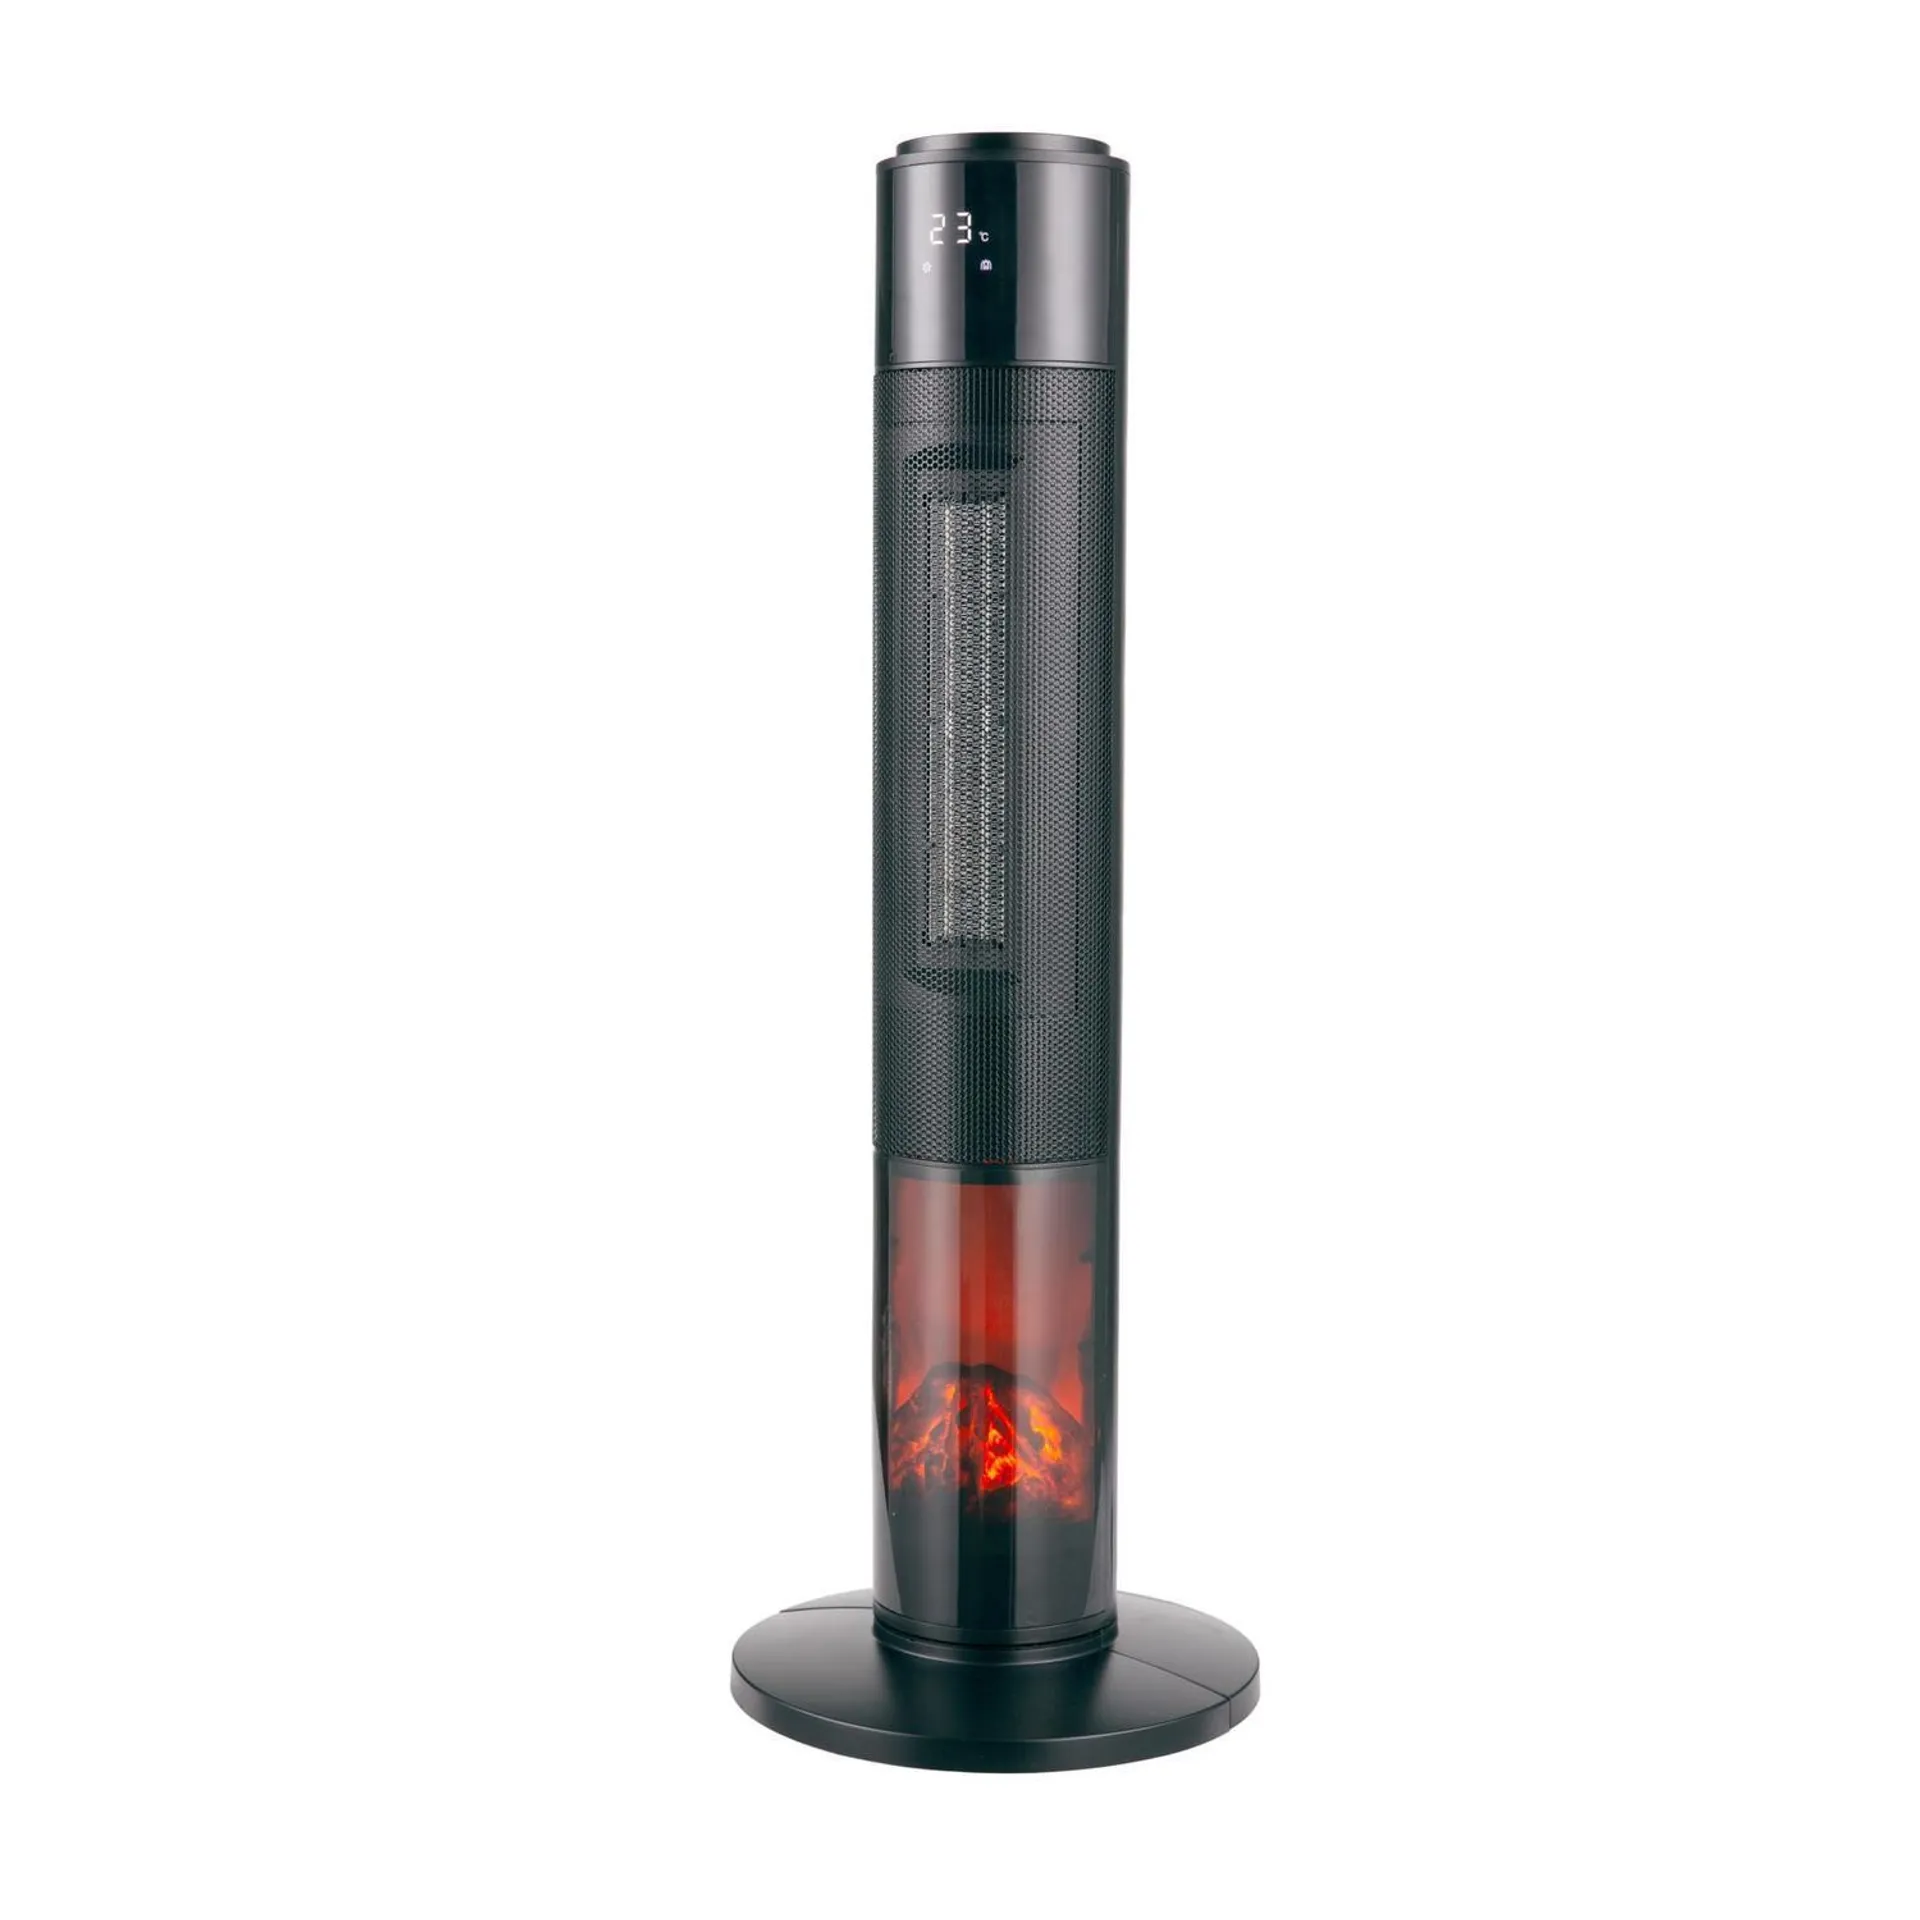 Flame Effect Ceramic Tower Heater 2kW Black